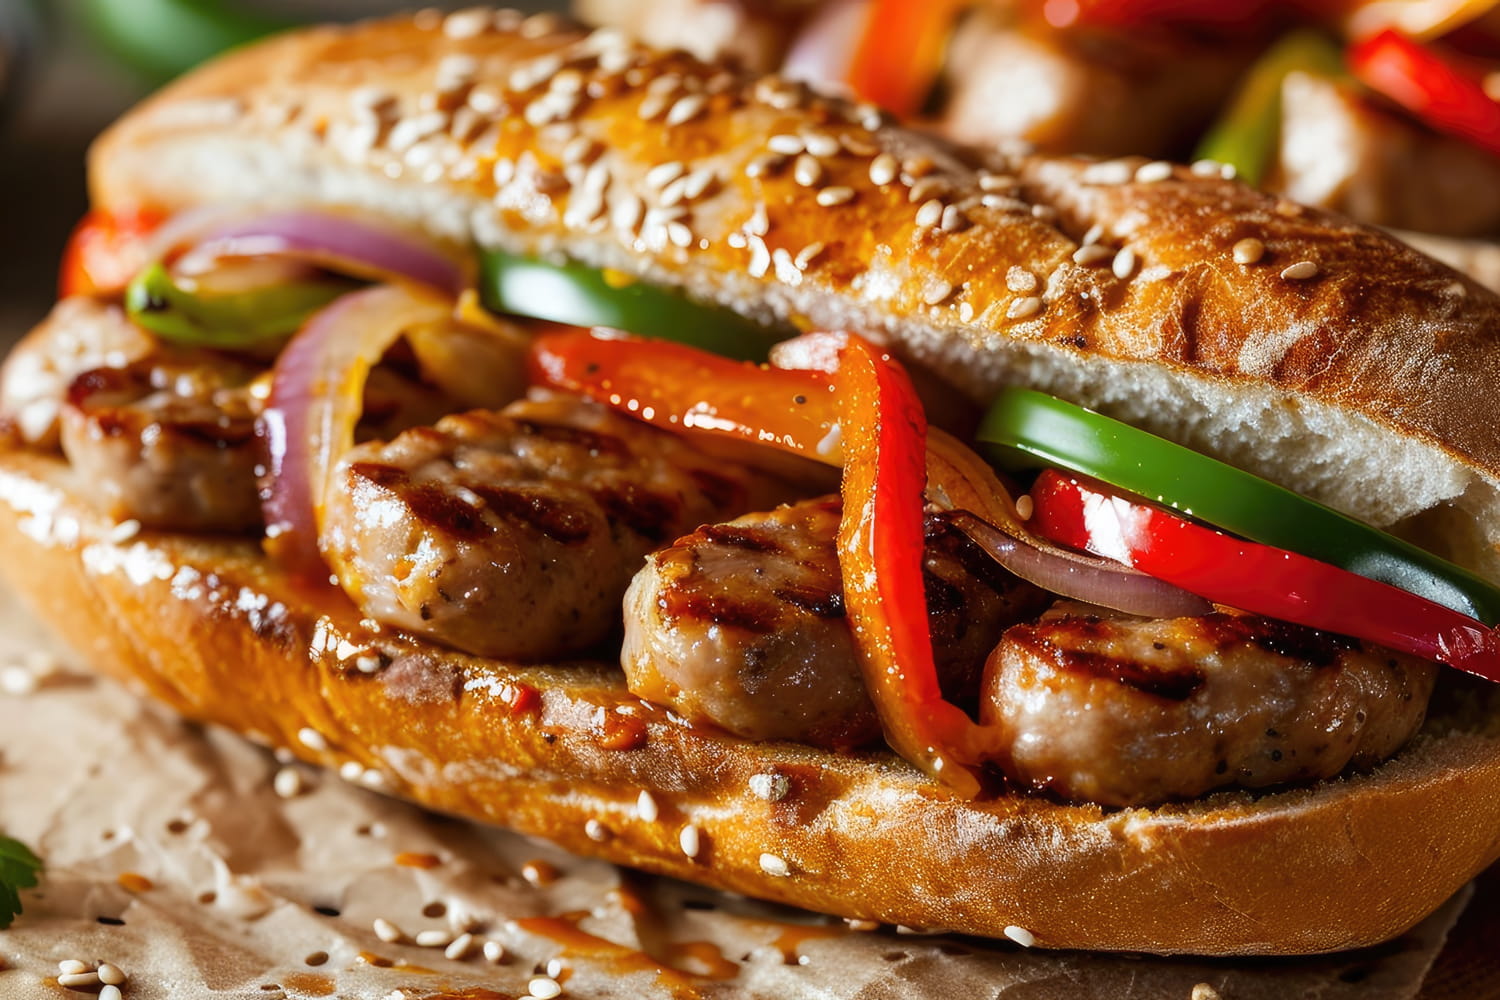 Italian sausage sandwich with peppers and onions